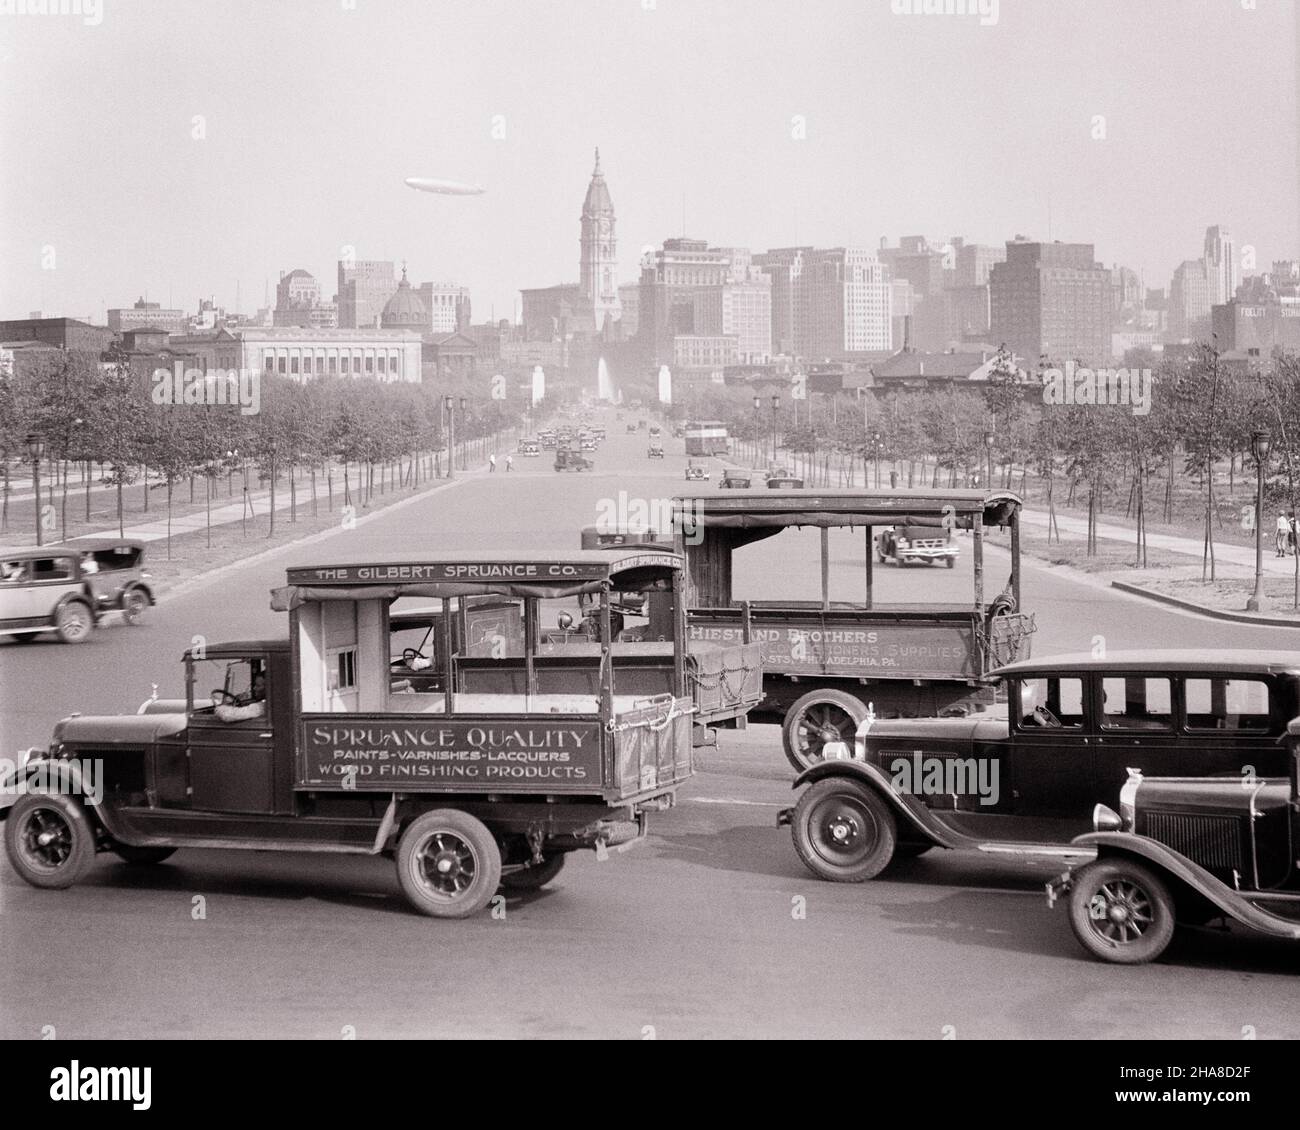 1920s 1930s CAR AND TRUCK TRAFFIC AROUND THE ART MUSEUM VIEW TOWARDS DOWNTOWN SKYLINE BLIMP IN SKY PHILADELPHIA PA USA - p2881 HAR001 HARS STRUCTURES AUTOMOBILES BENJAMIN FRANKLIN PARKWAY CITIES KEYSTONE STATE VEHICLES AIRSHIP EDIFICE DIRIGIBLE BLACK AND WHITE CITY OF BROTHERLY LOVE HAR001 OLD FASHIONED Stock Photo